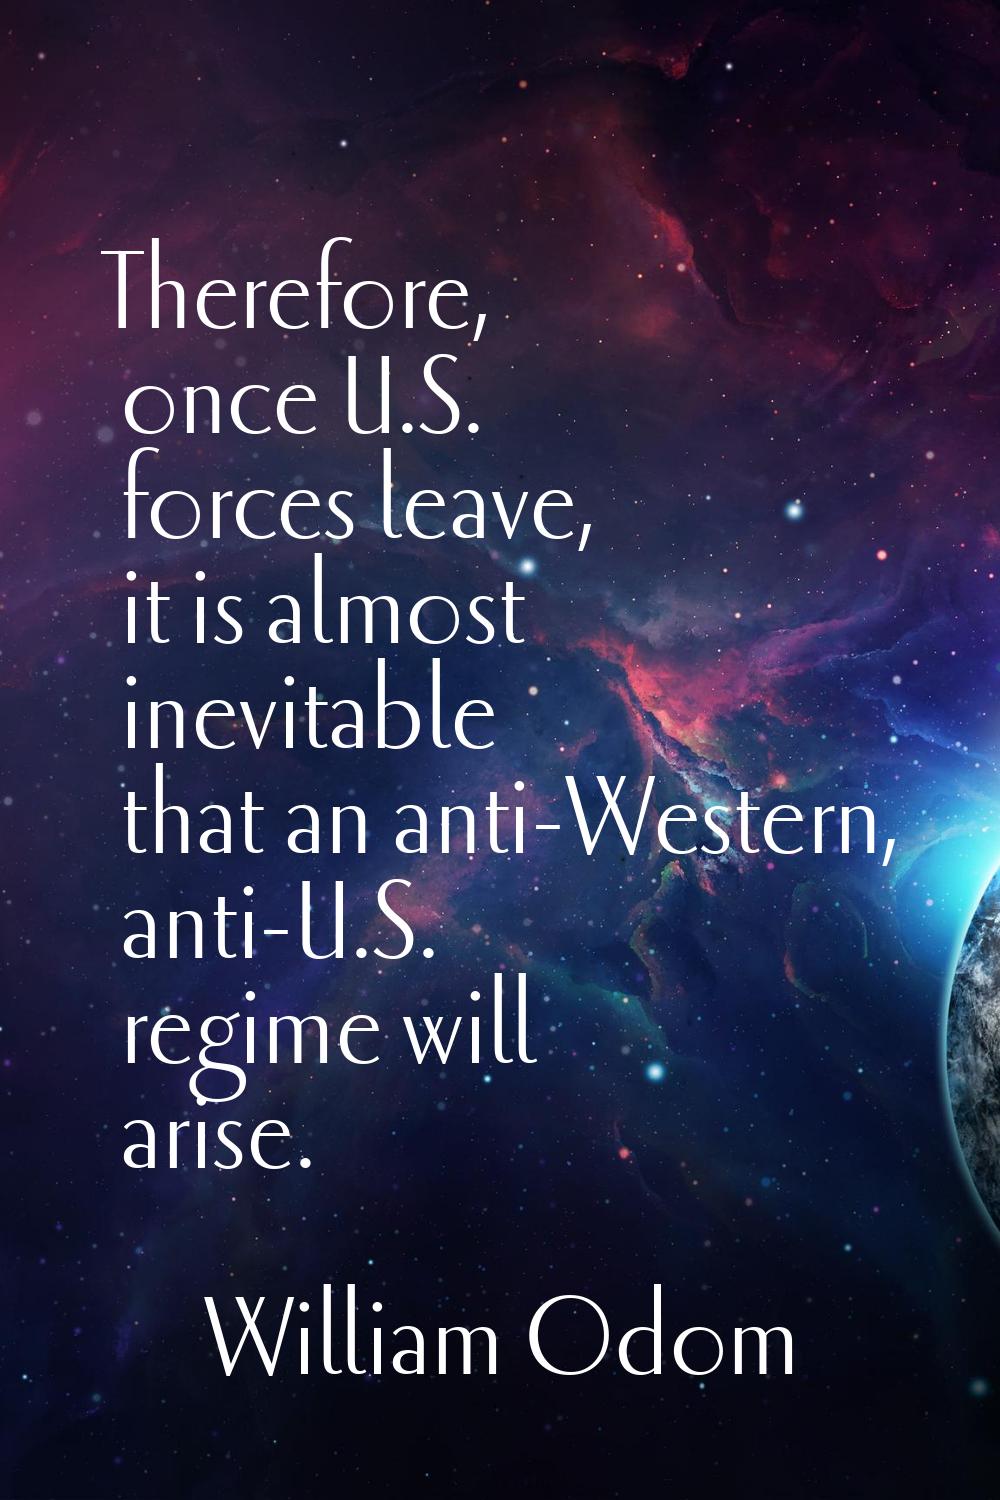 Therefore, once U.S. forces leave, it is almost inevitable that an anti-Western, anti-U.S. regime w